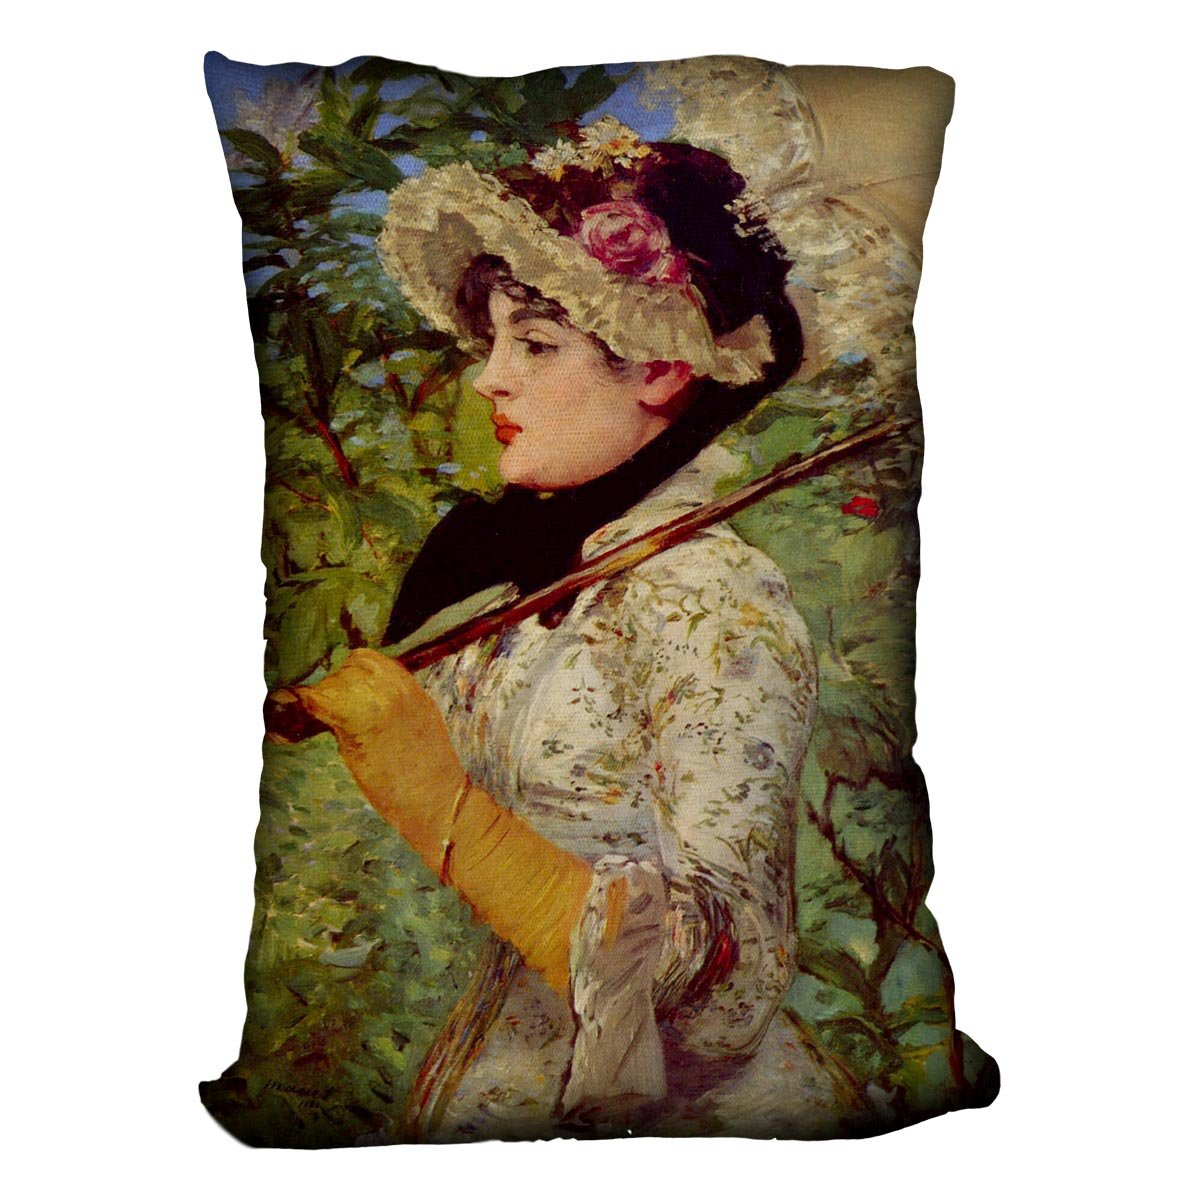 Jeanne by Manet Throw Pillow